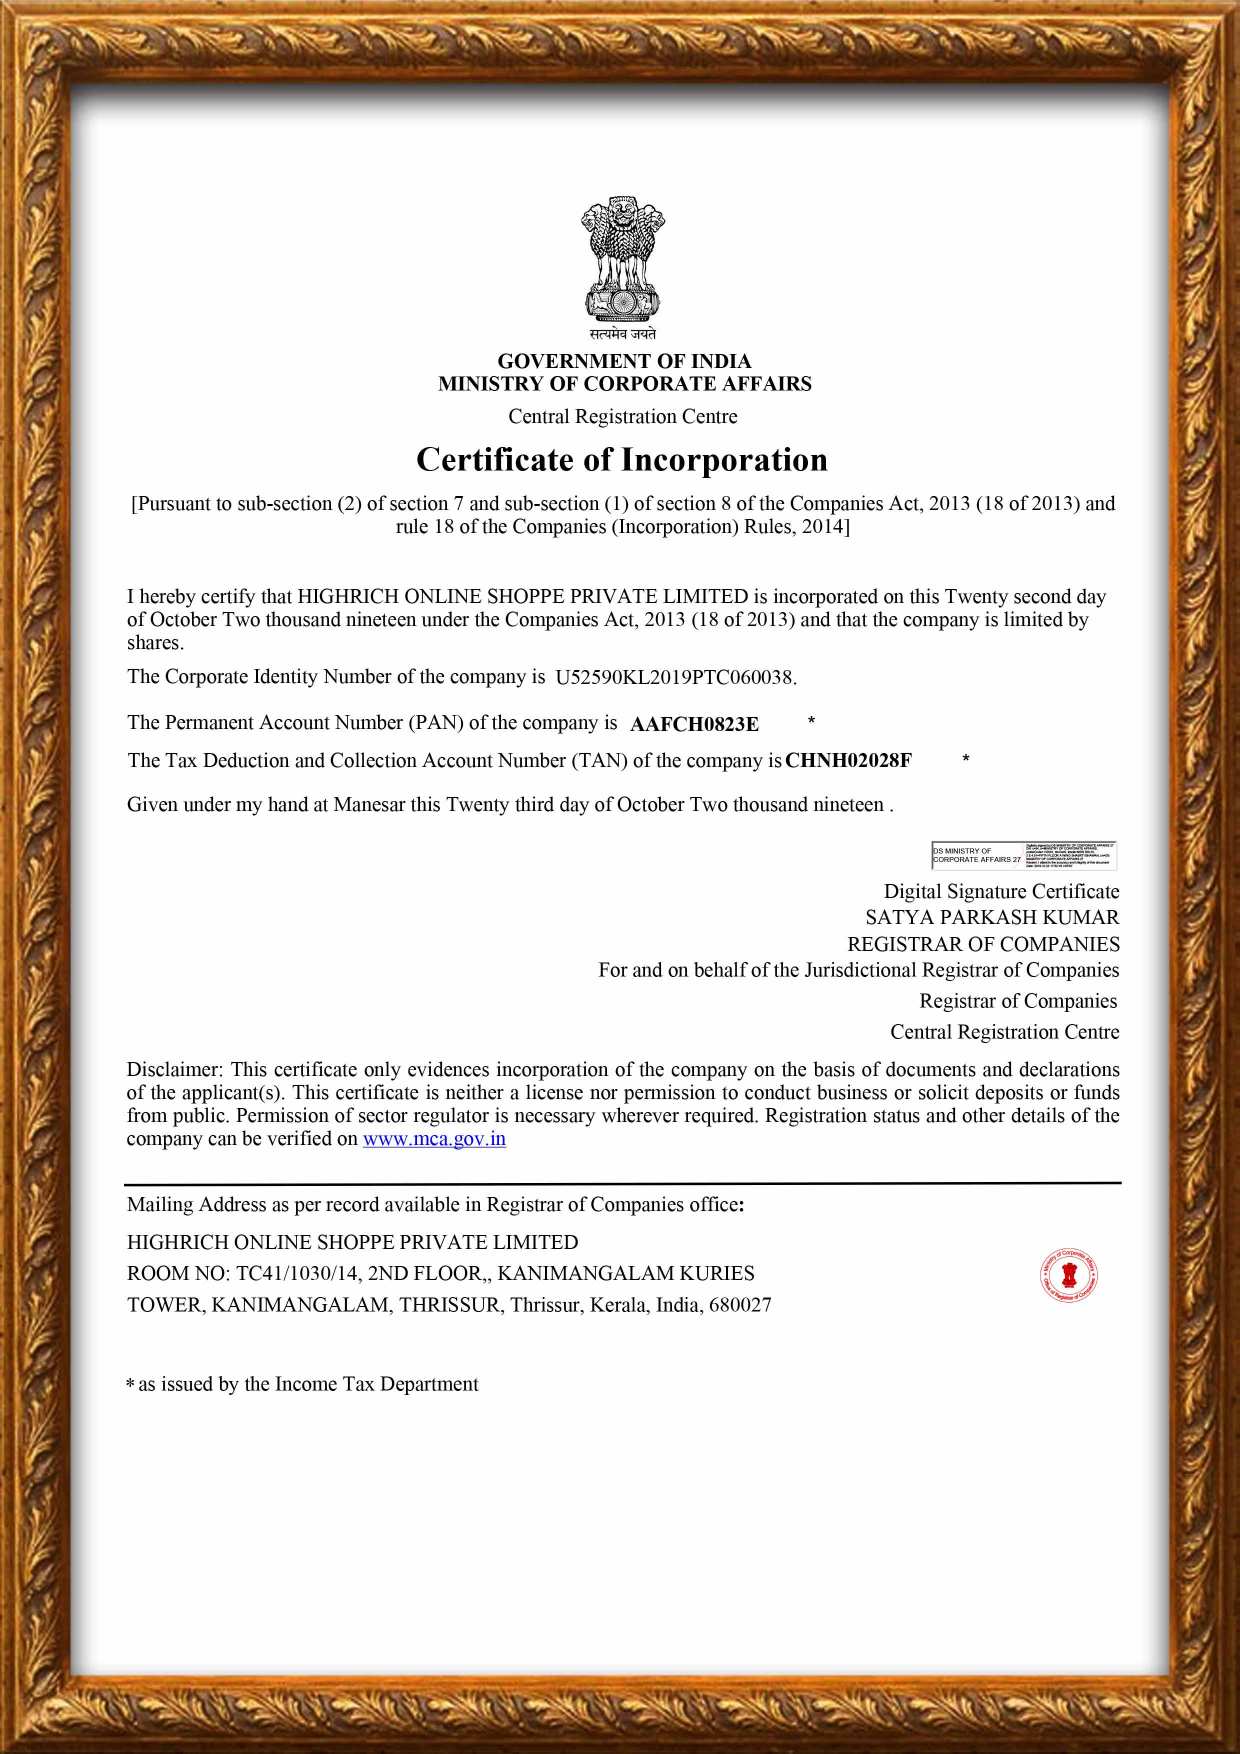 Highrich Certificate-of-Incorporation